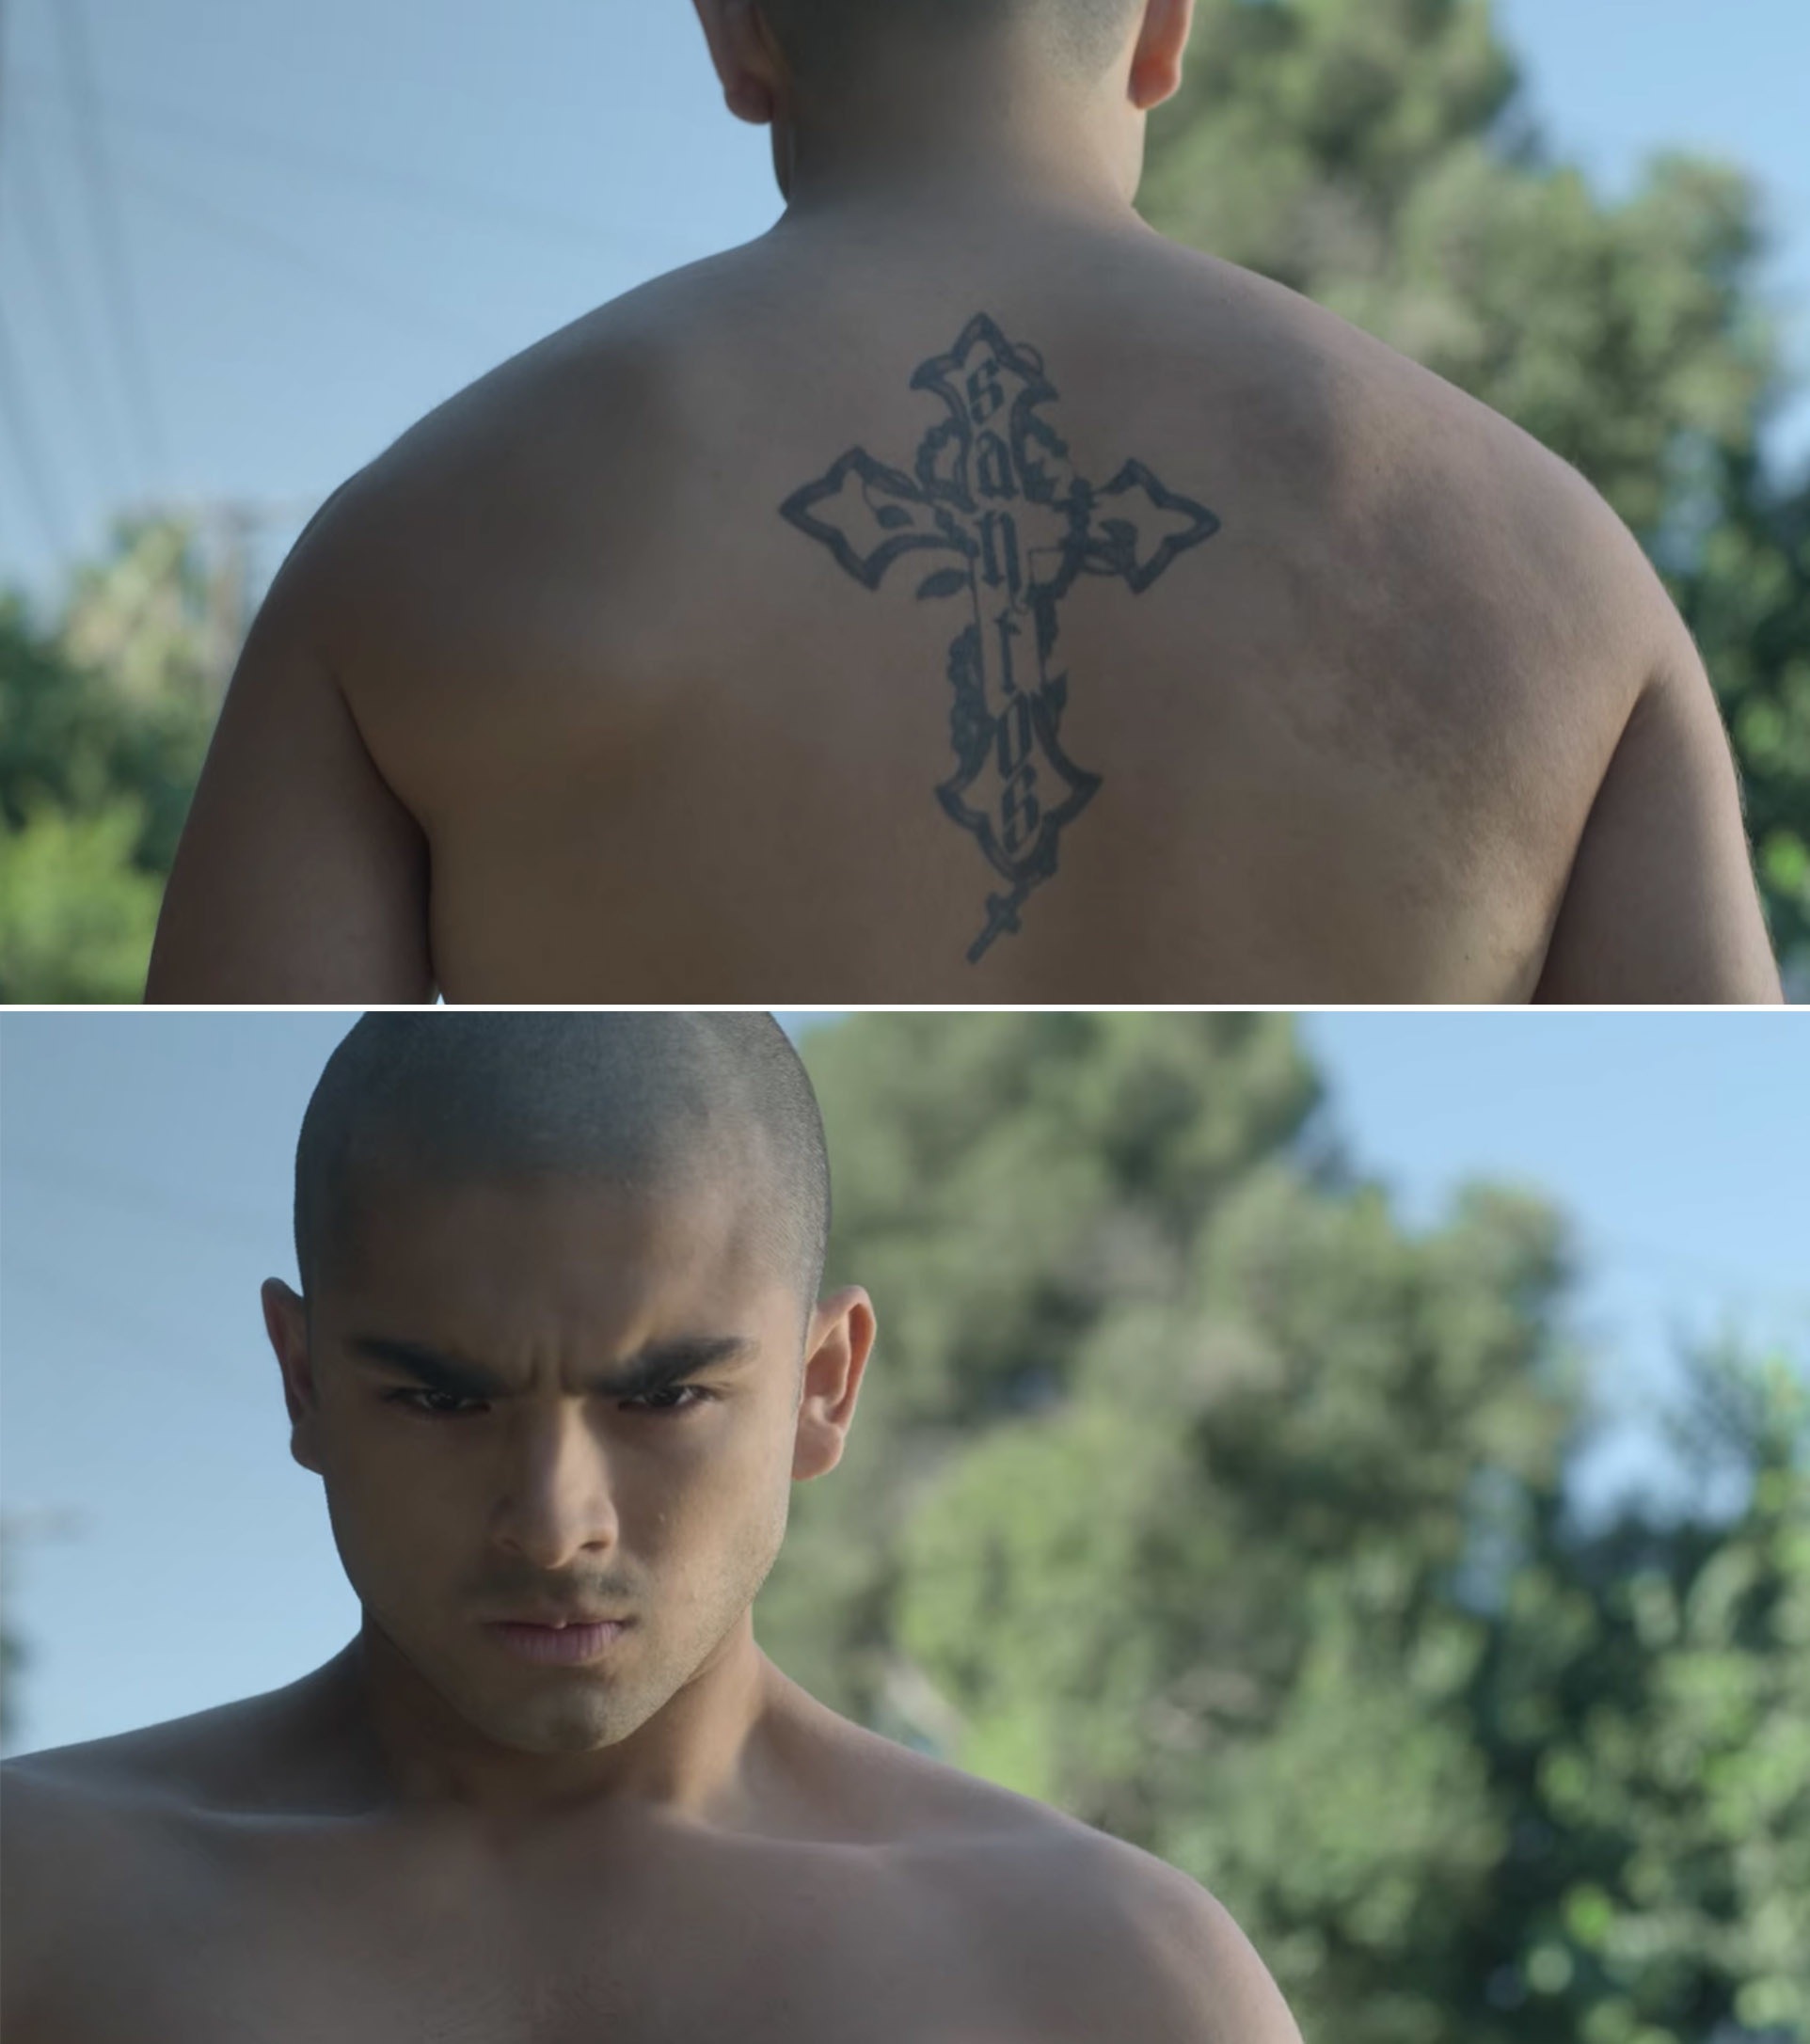 César with a shaved head and a Santos tattoo